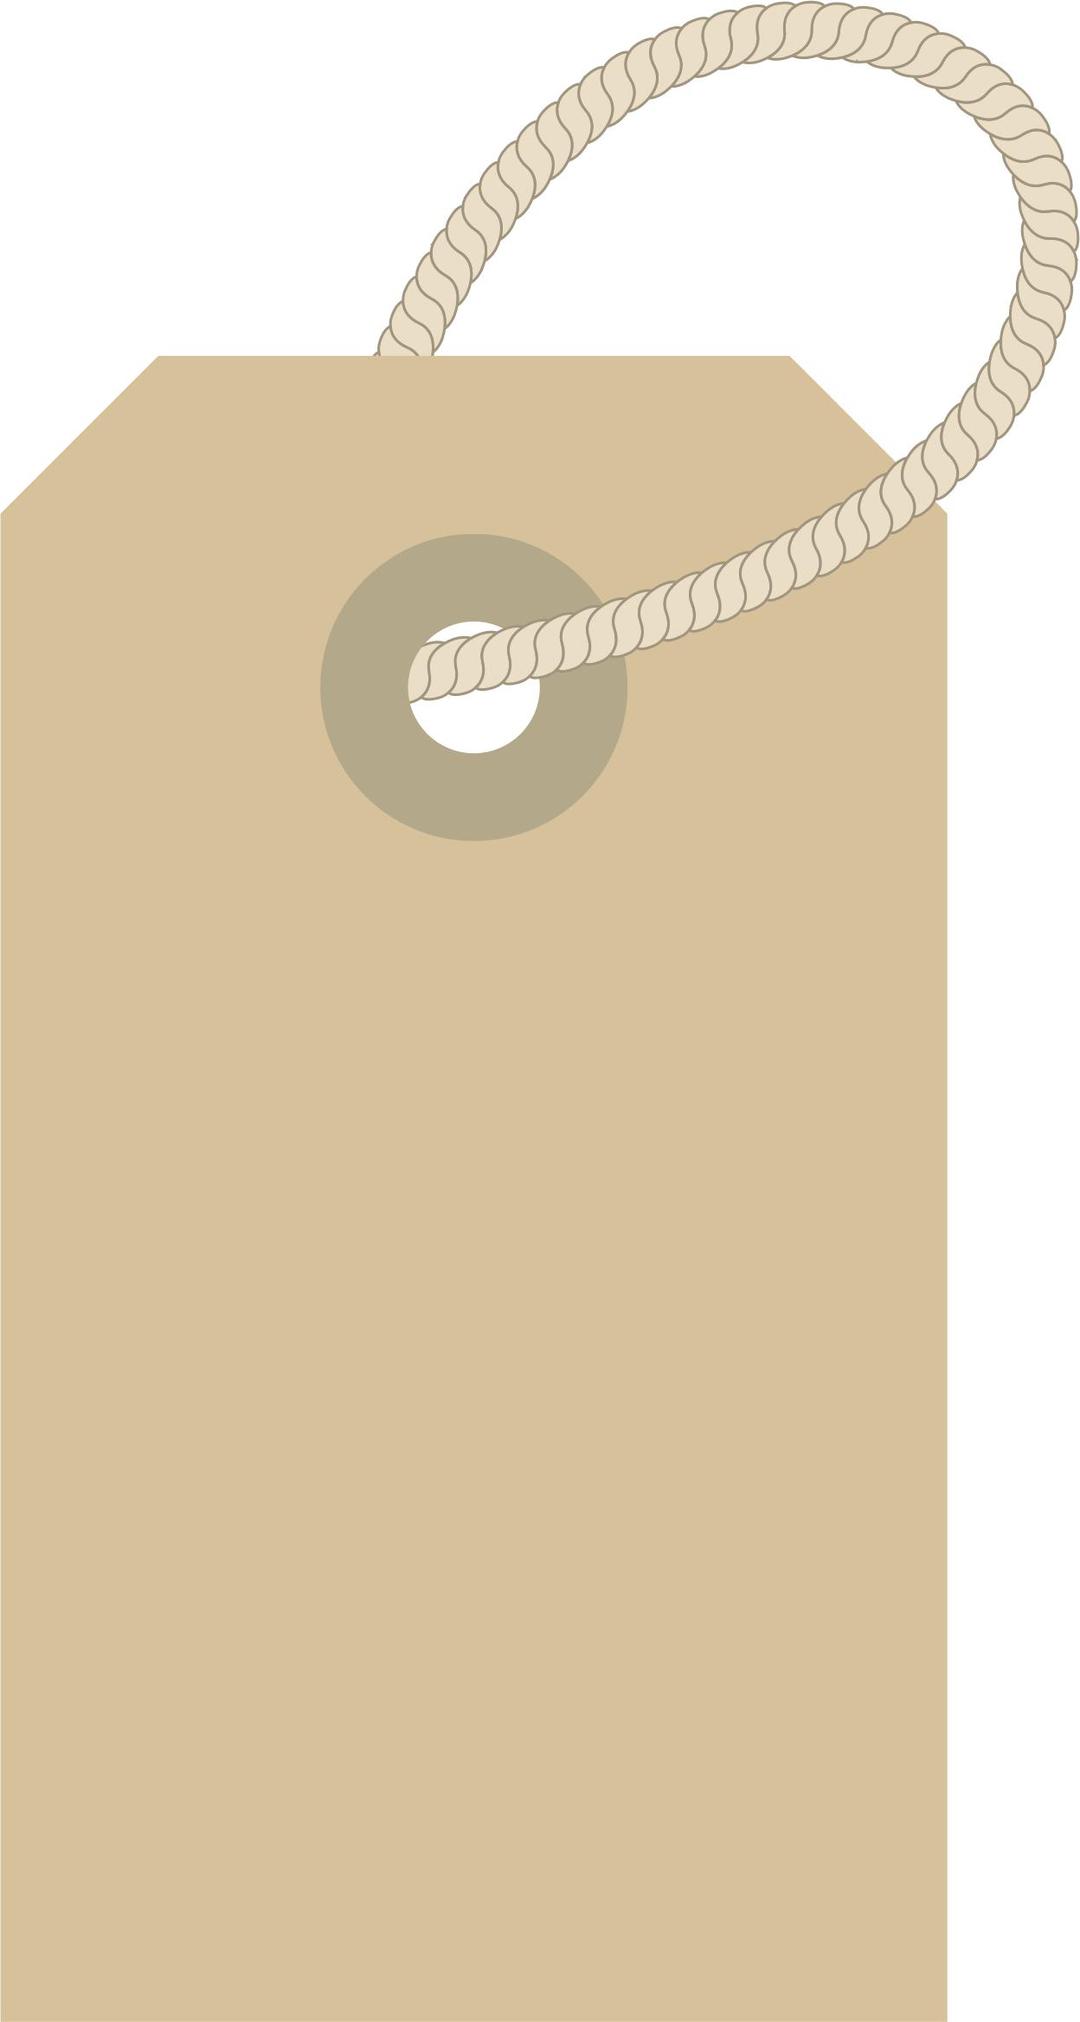 Clothing Label with Rope png transparent